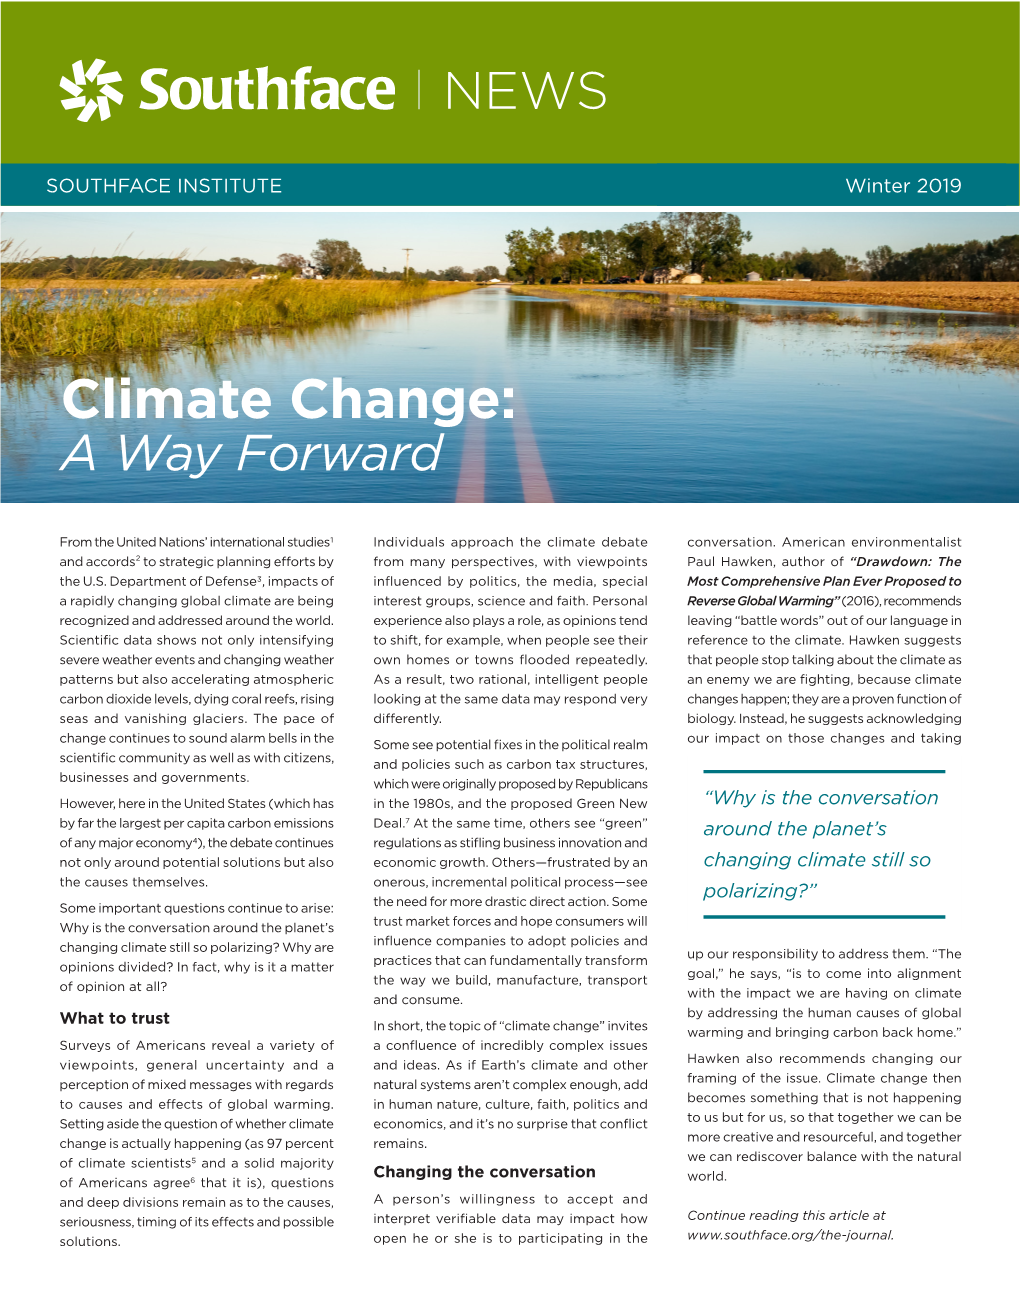 Climate Change: a Way Forward